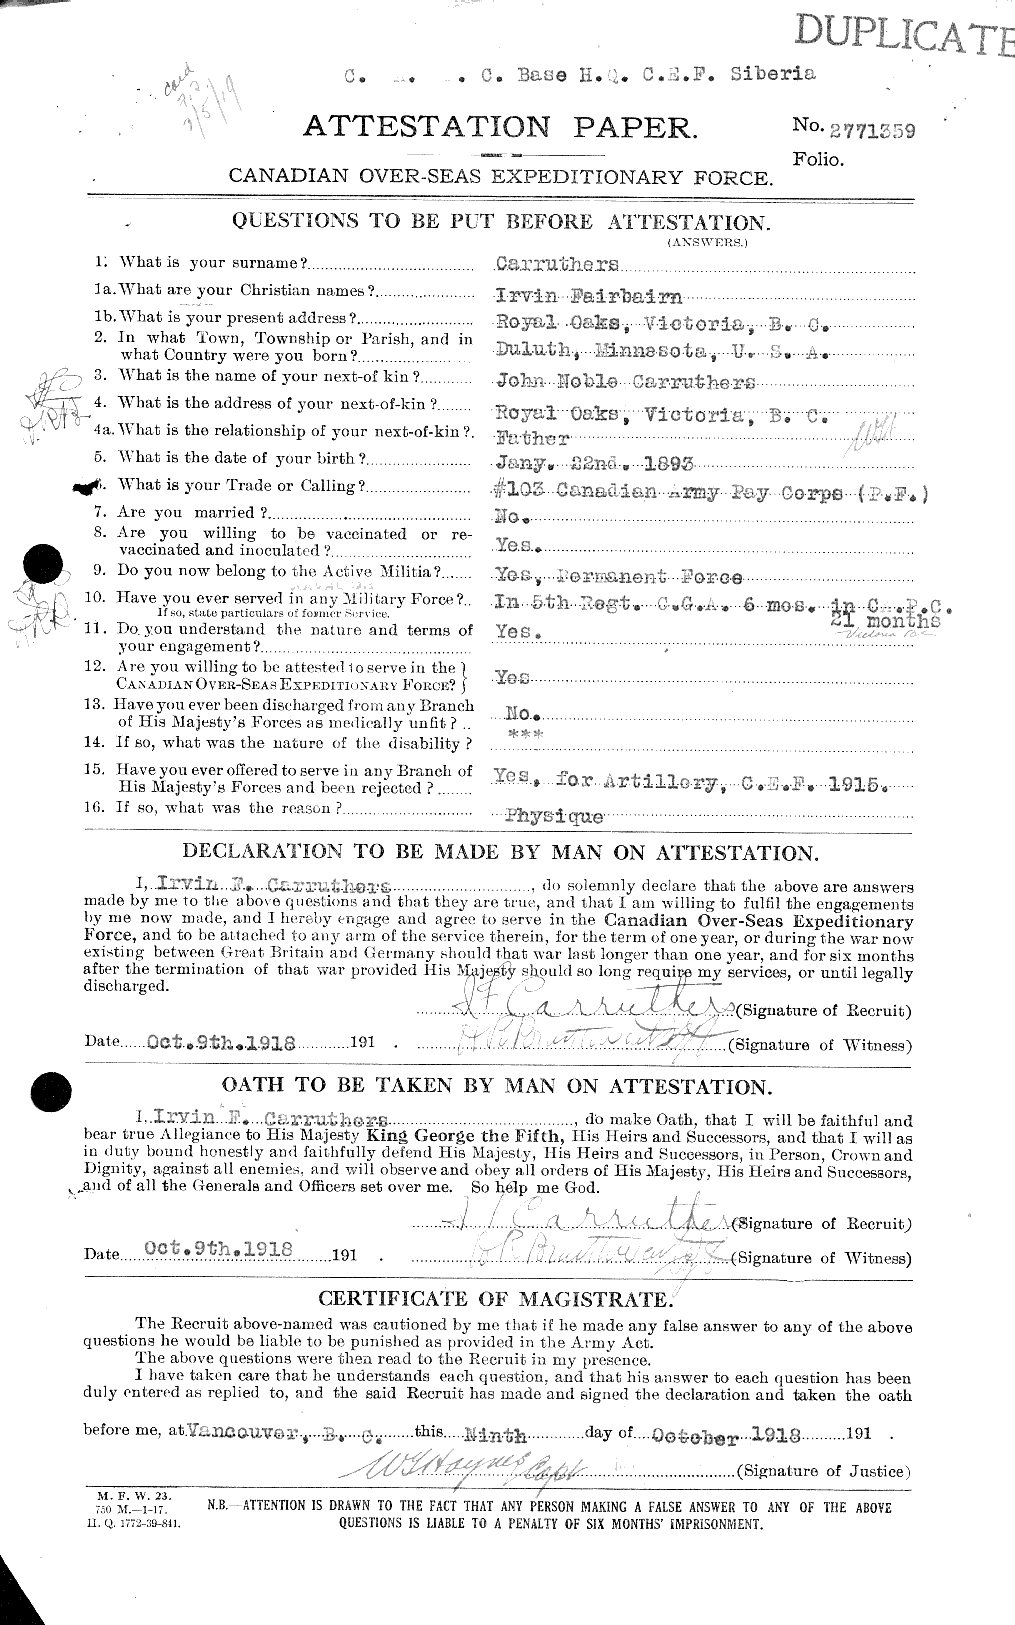 Personnel Records of the First World War - CEF 010691a